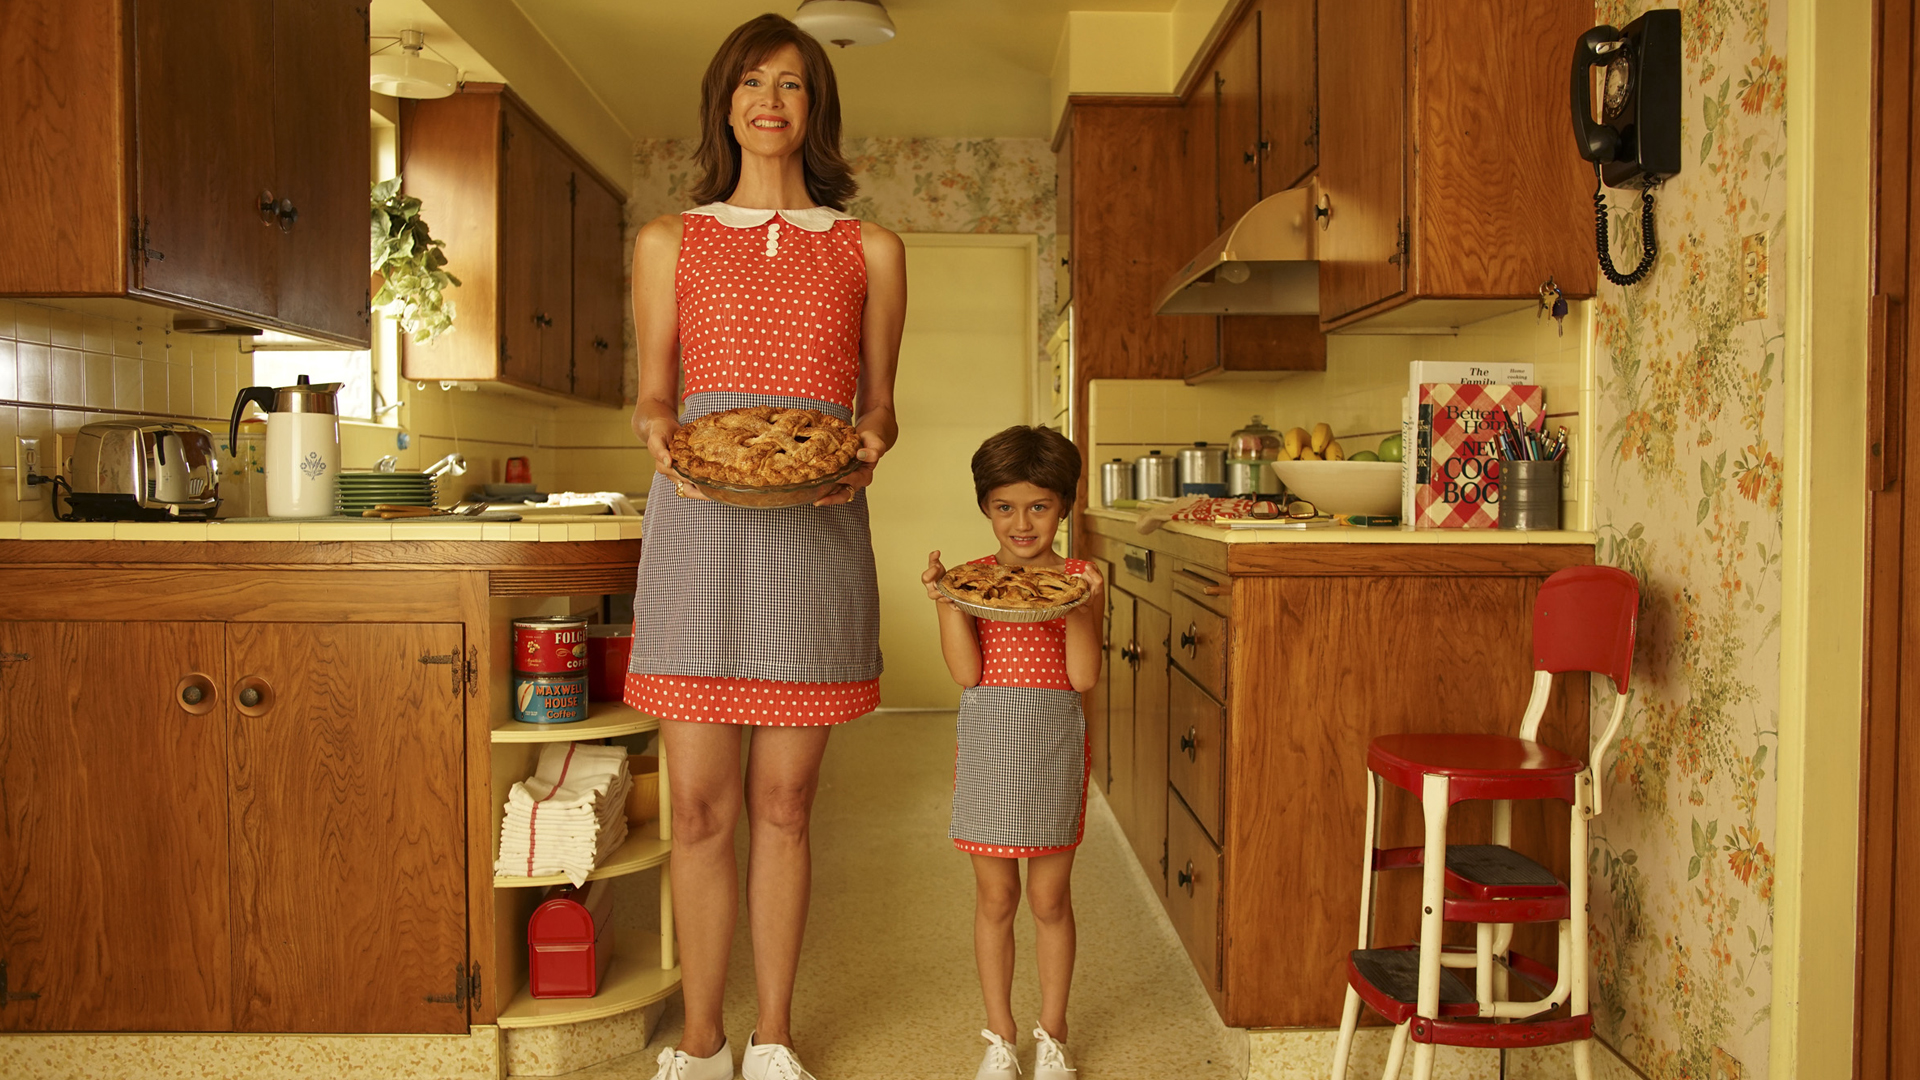 Woman and young girl in matching red dresses hold pies and smile in 70s kitchen